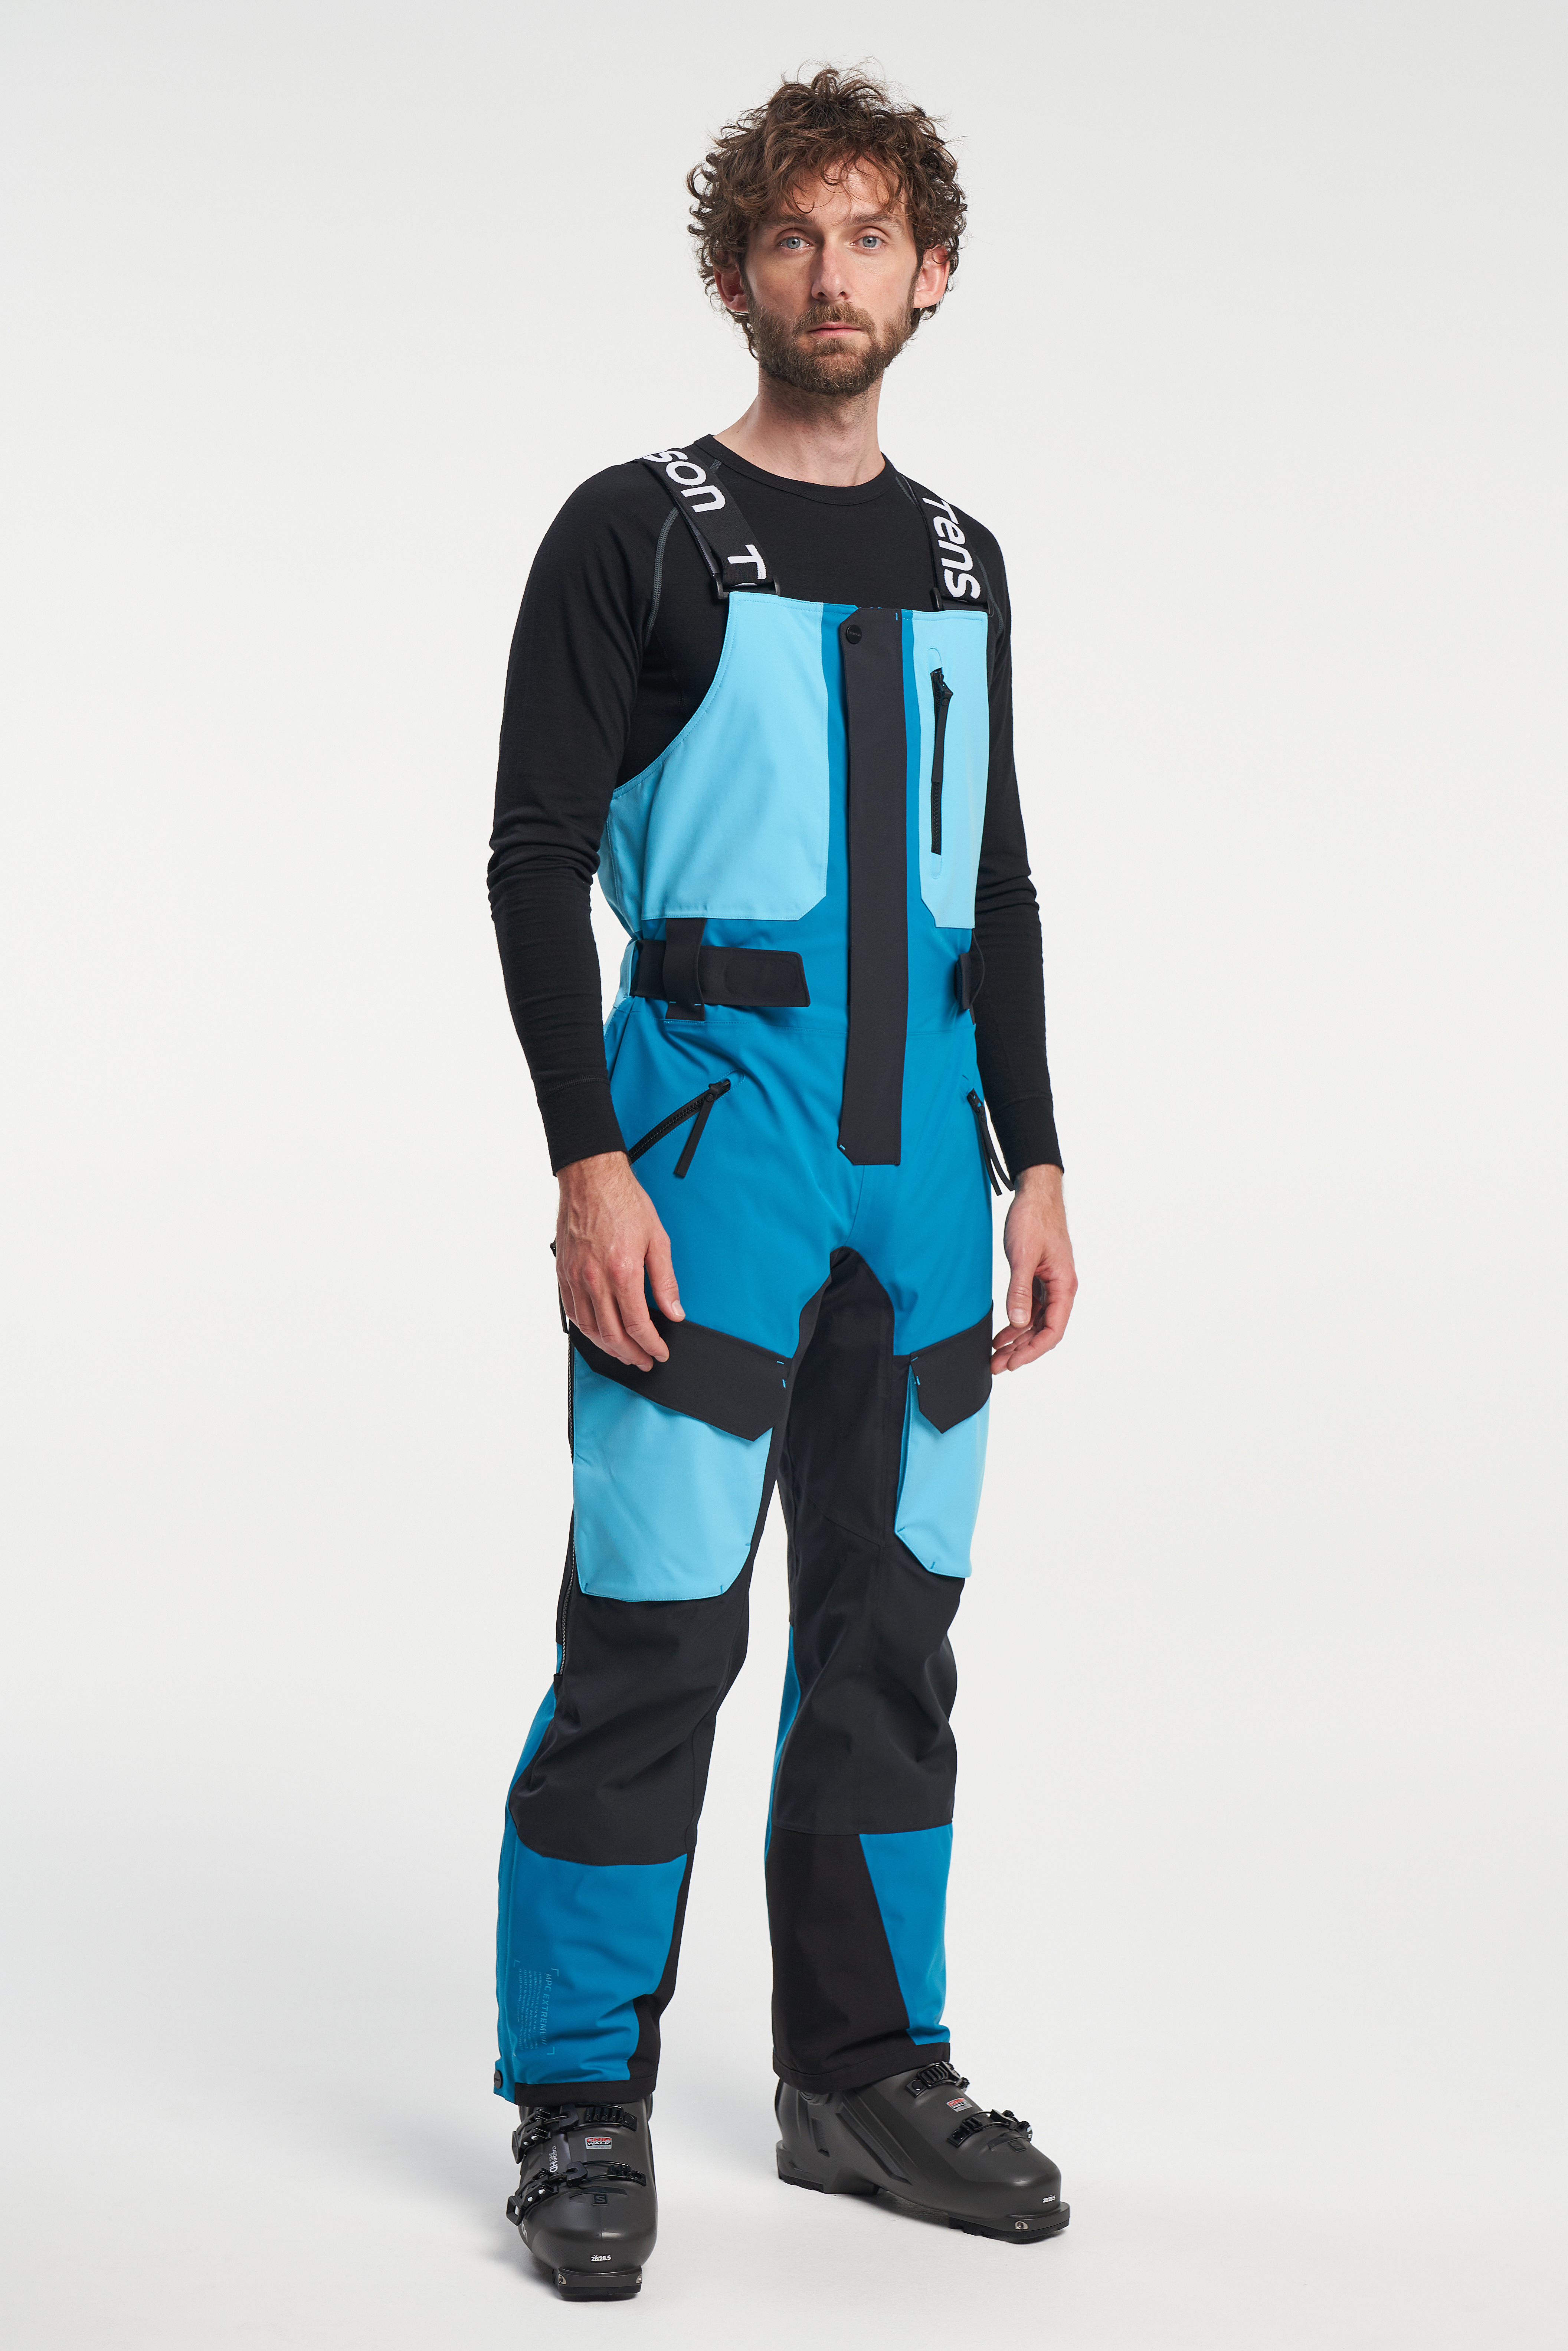 10 Of The Best Ski Pants For Men in 2023  FashionBeans